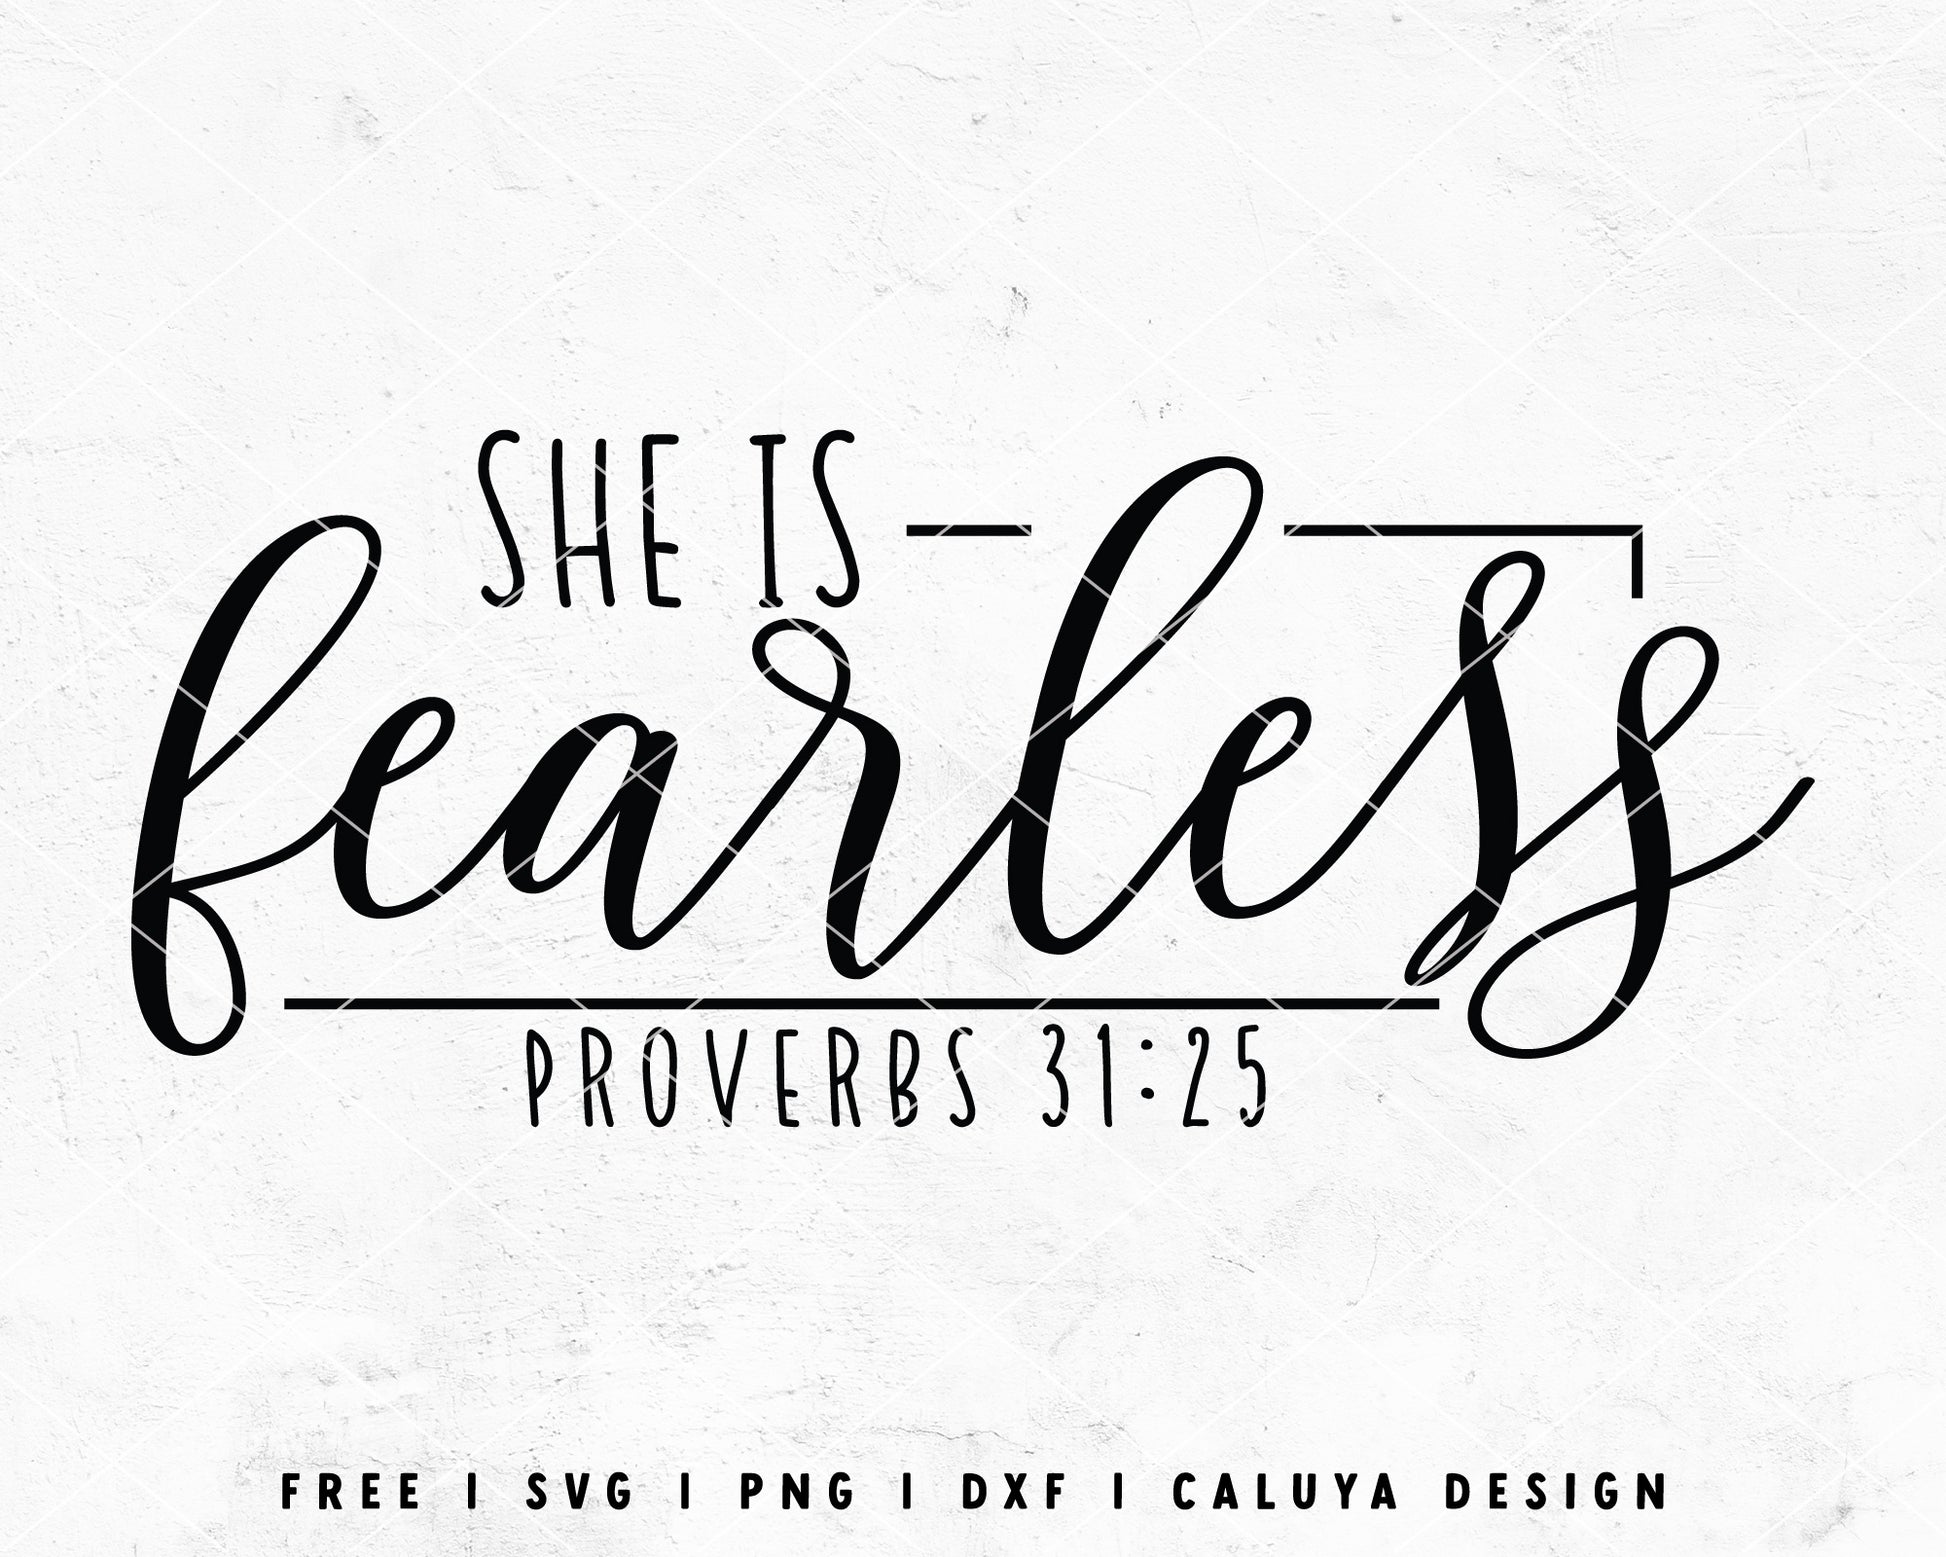 FREE Fearless SVG | Girl Boss SVG Cut File for Cricut, Cameo Silhouette | Free SVG Cut File